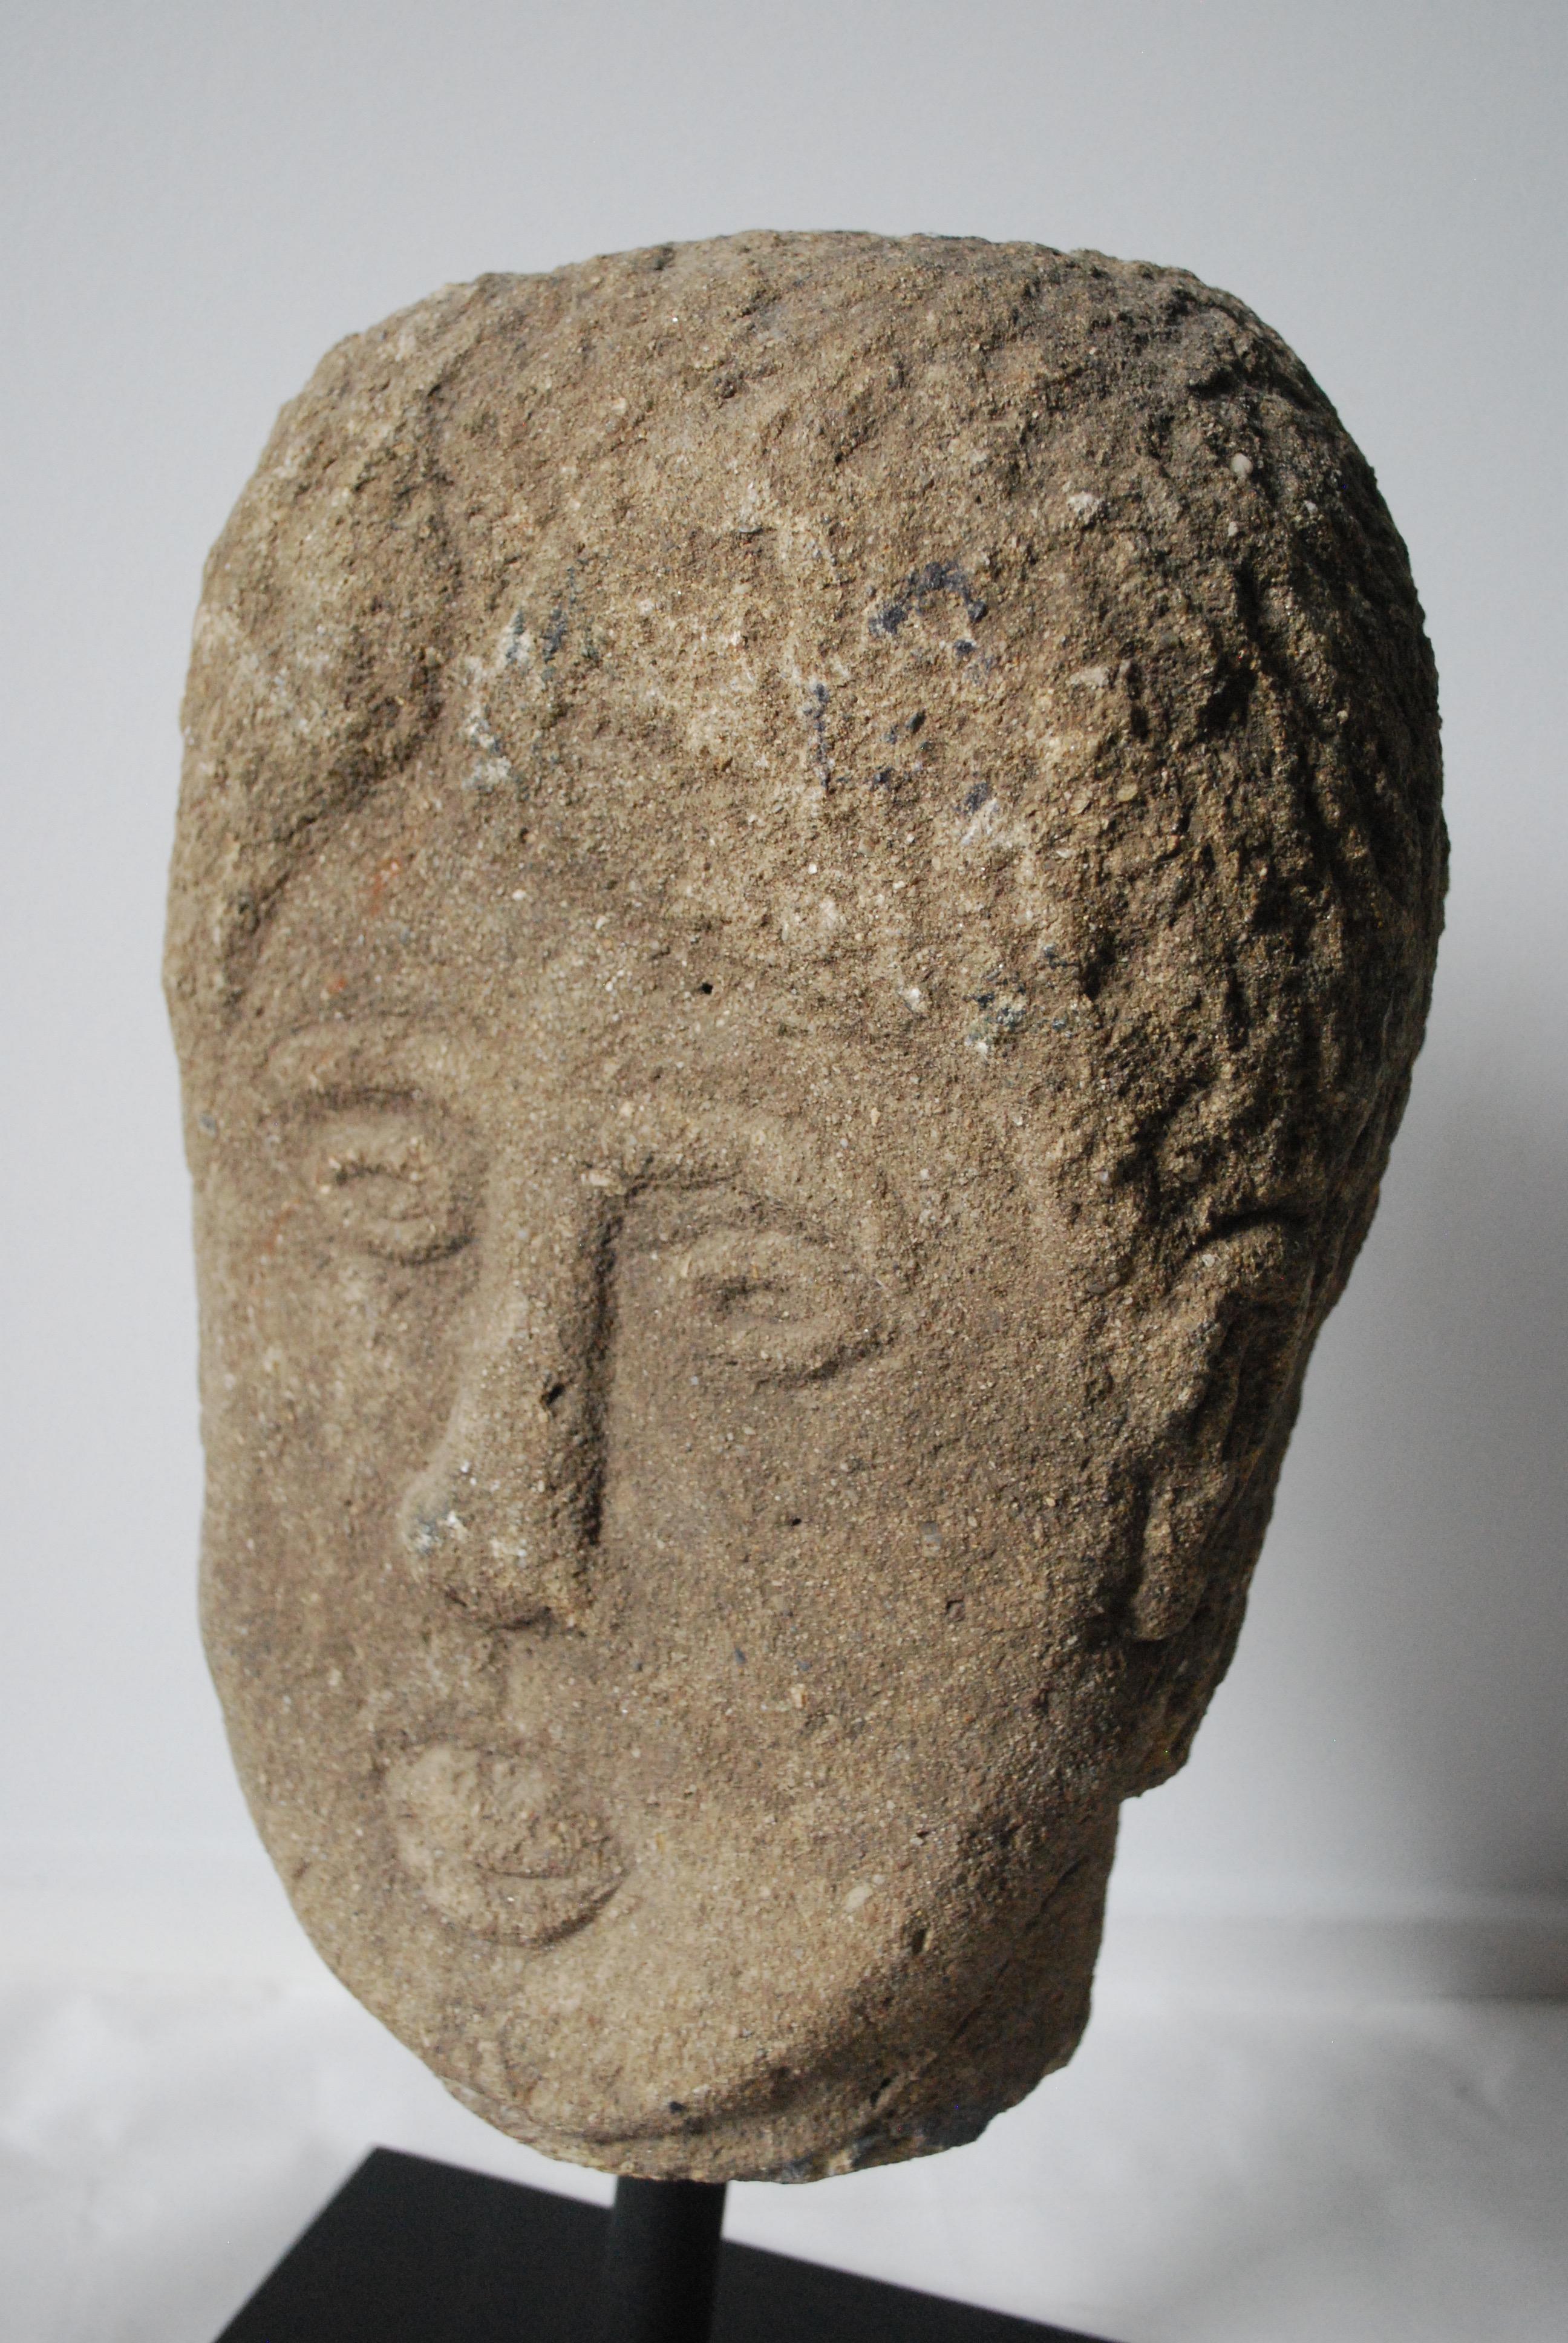 19th century quirky English stone head on stand.